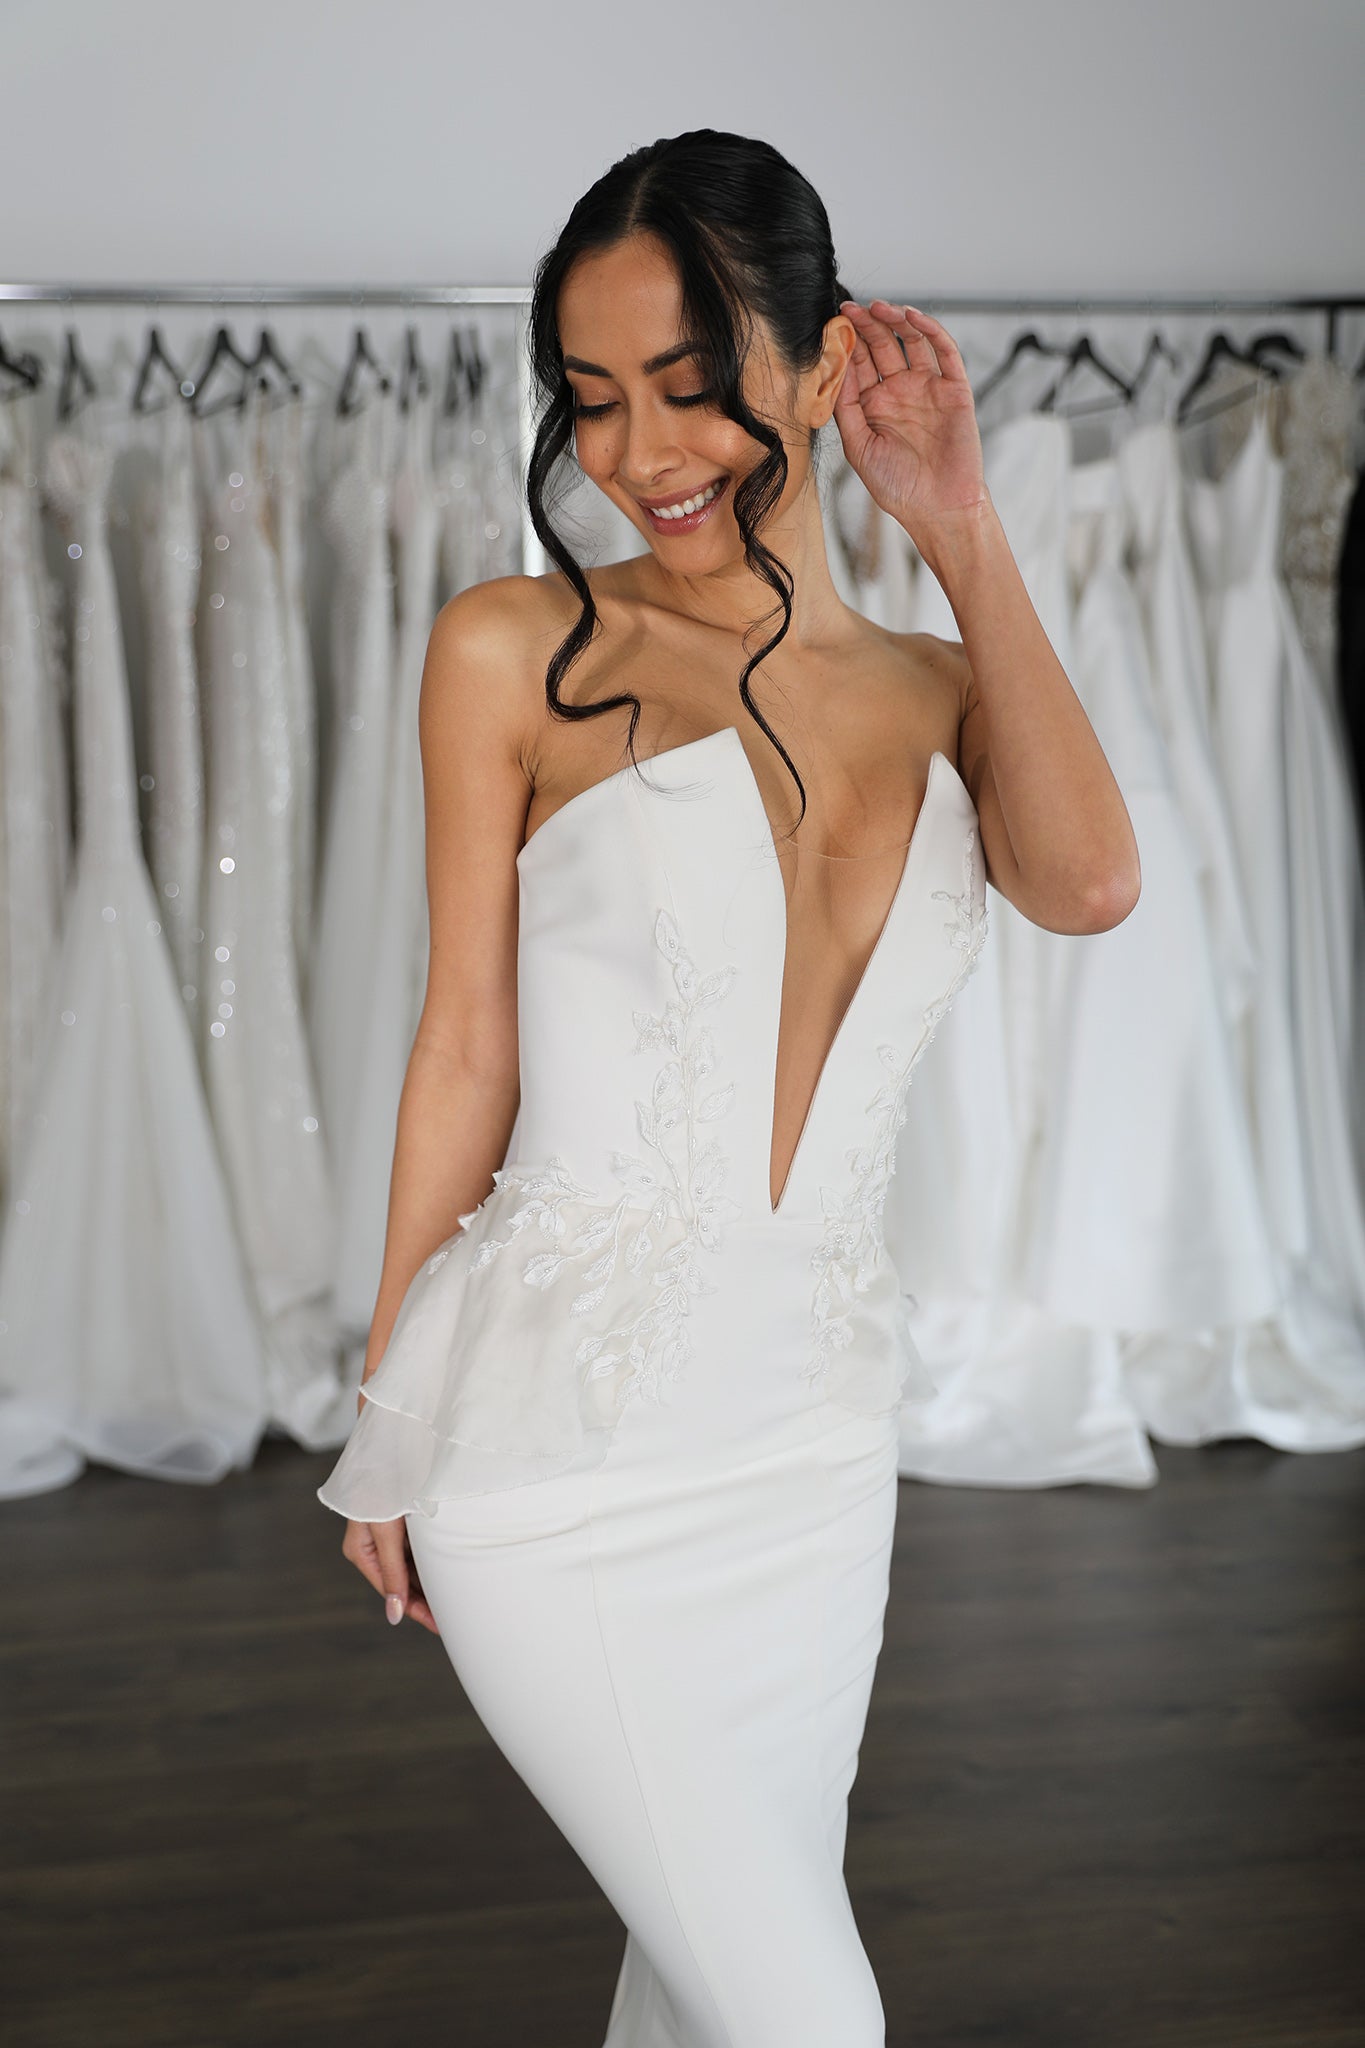 low cut v-neck wedding dress with lace peplums